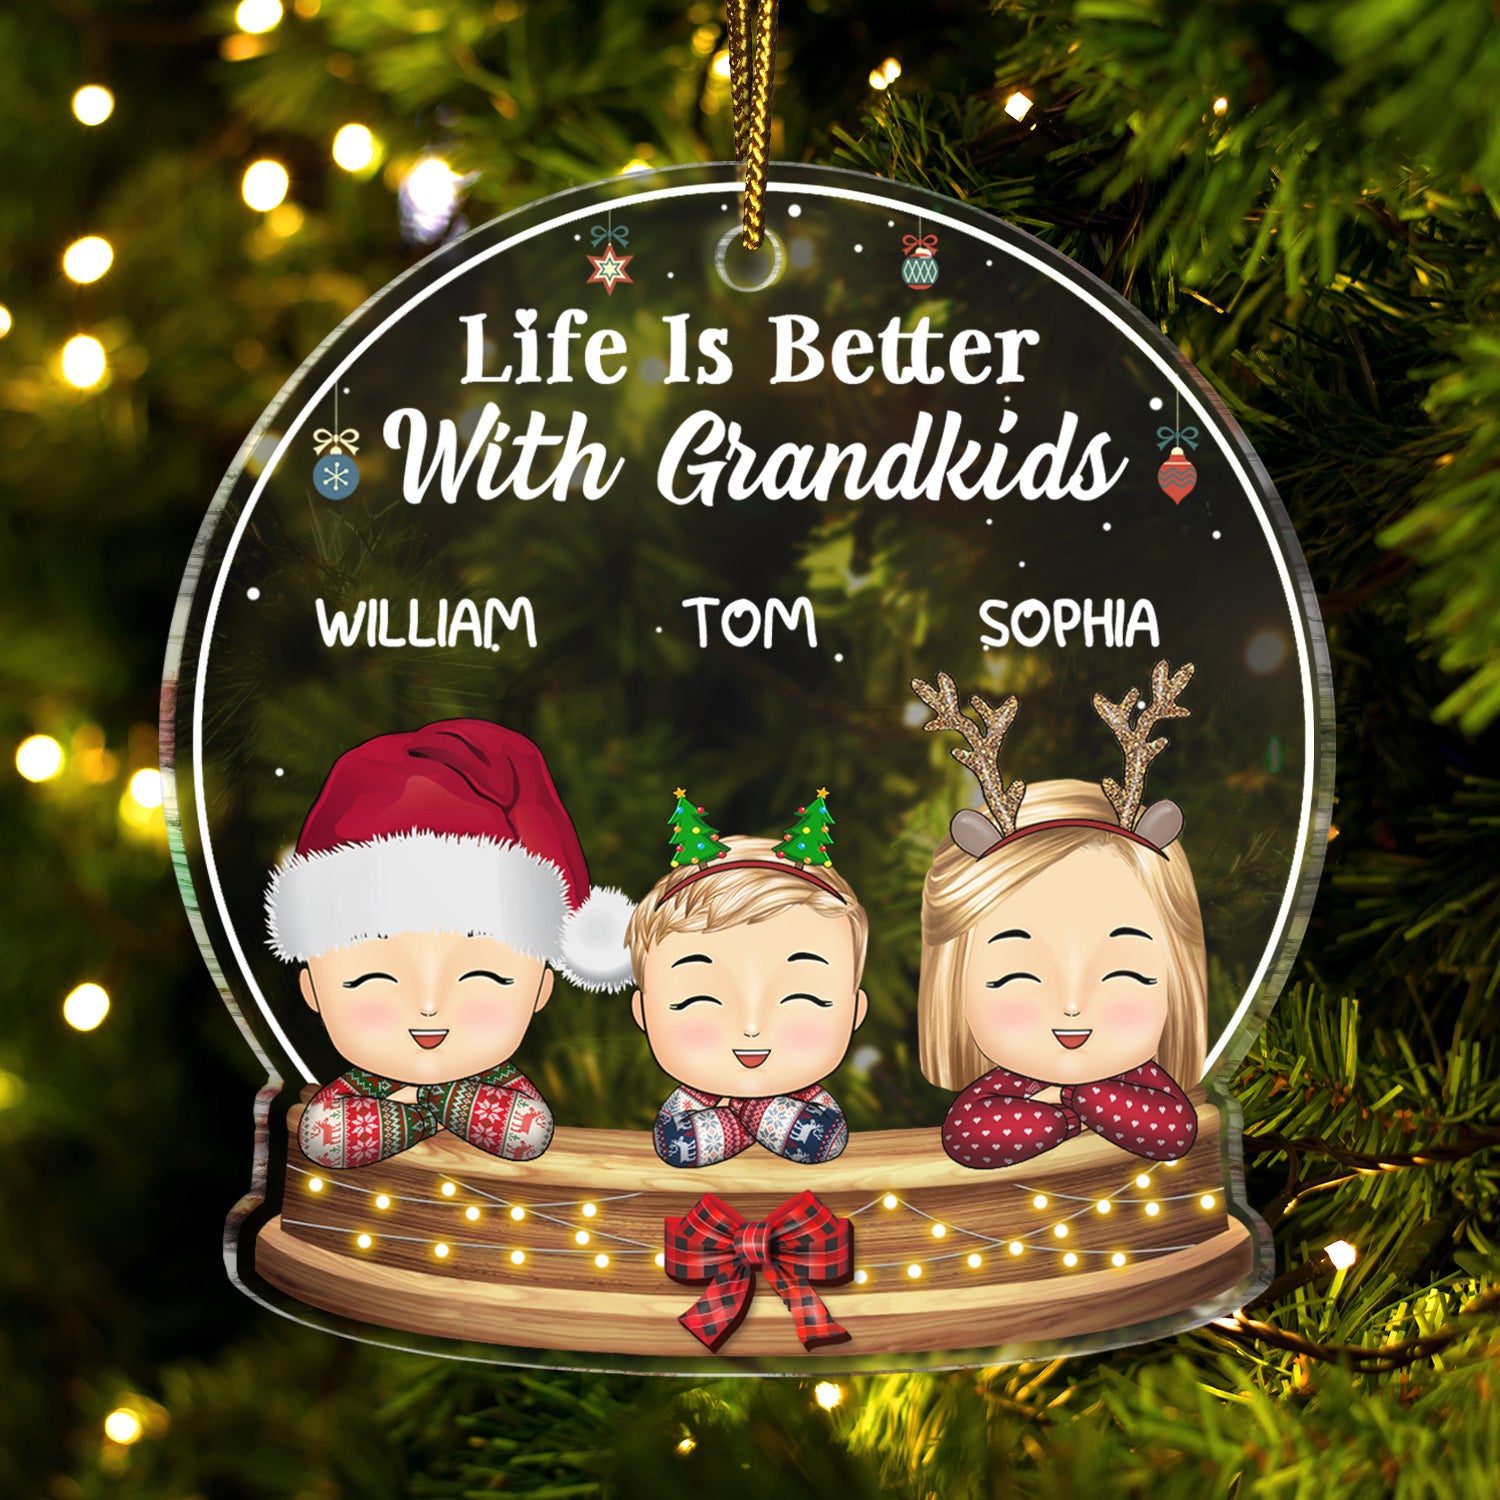 Life Is Better With Grandkids - Christmas, Loving Gift For Grandpa, Grandma, Grandparents - Personalized Custom Shaped Acrylic Ornament